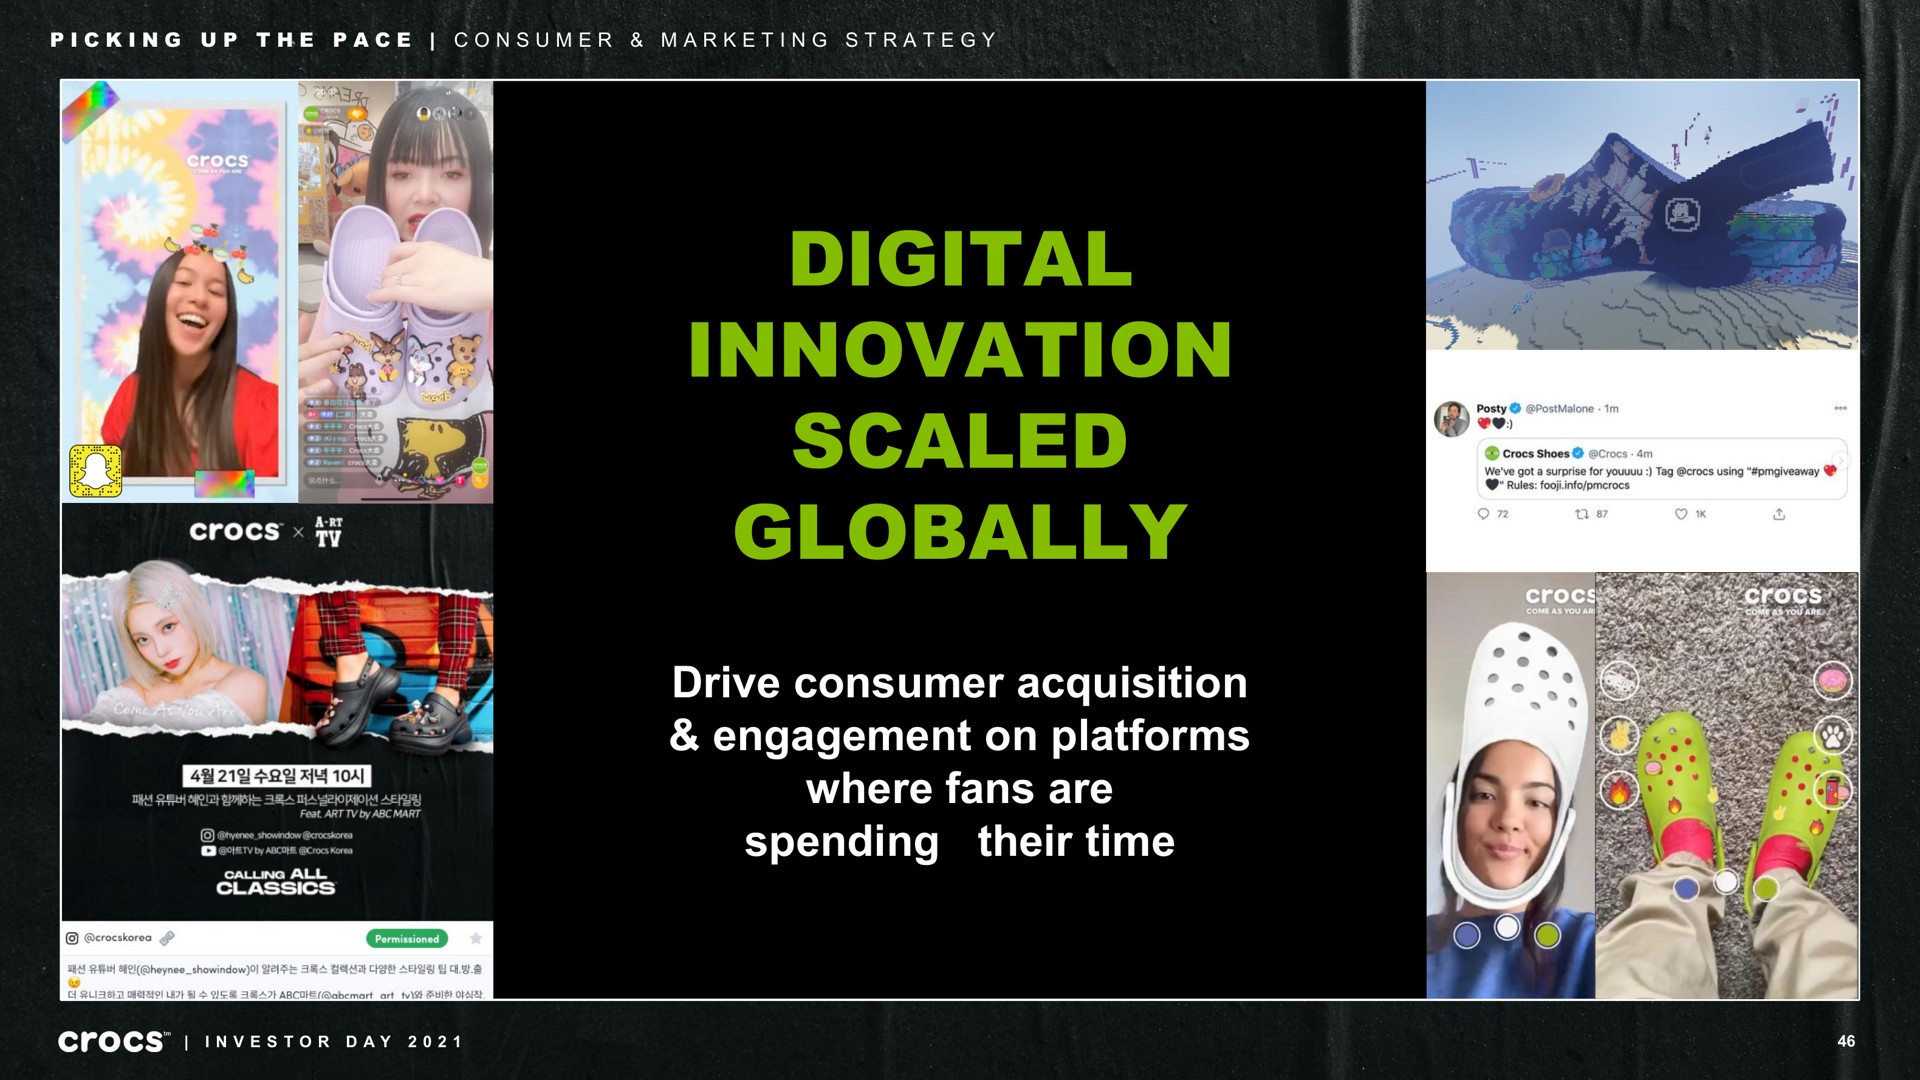 digital innovation scaled globally drive consumer acquisition engagement on platforms where fans are spending their time picking up the pace marketing strategy fou a be investor day | Crocs